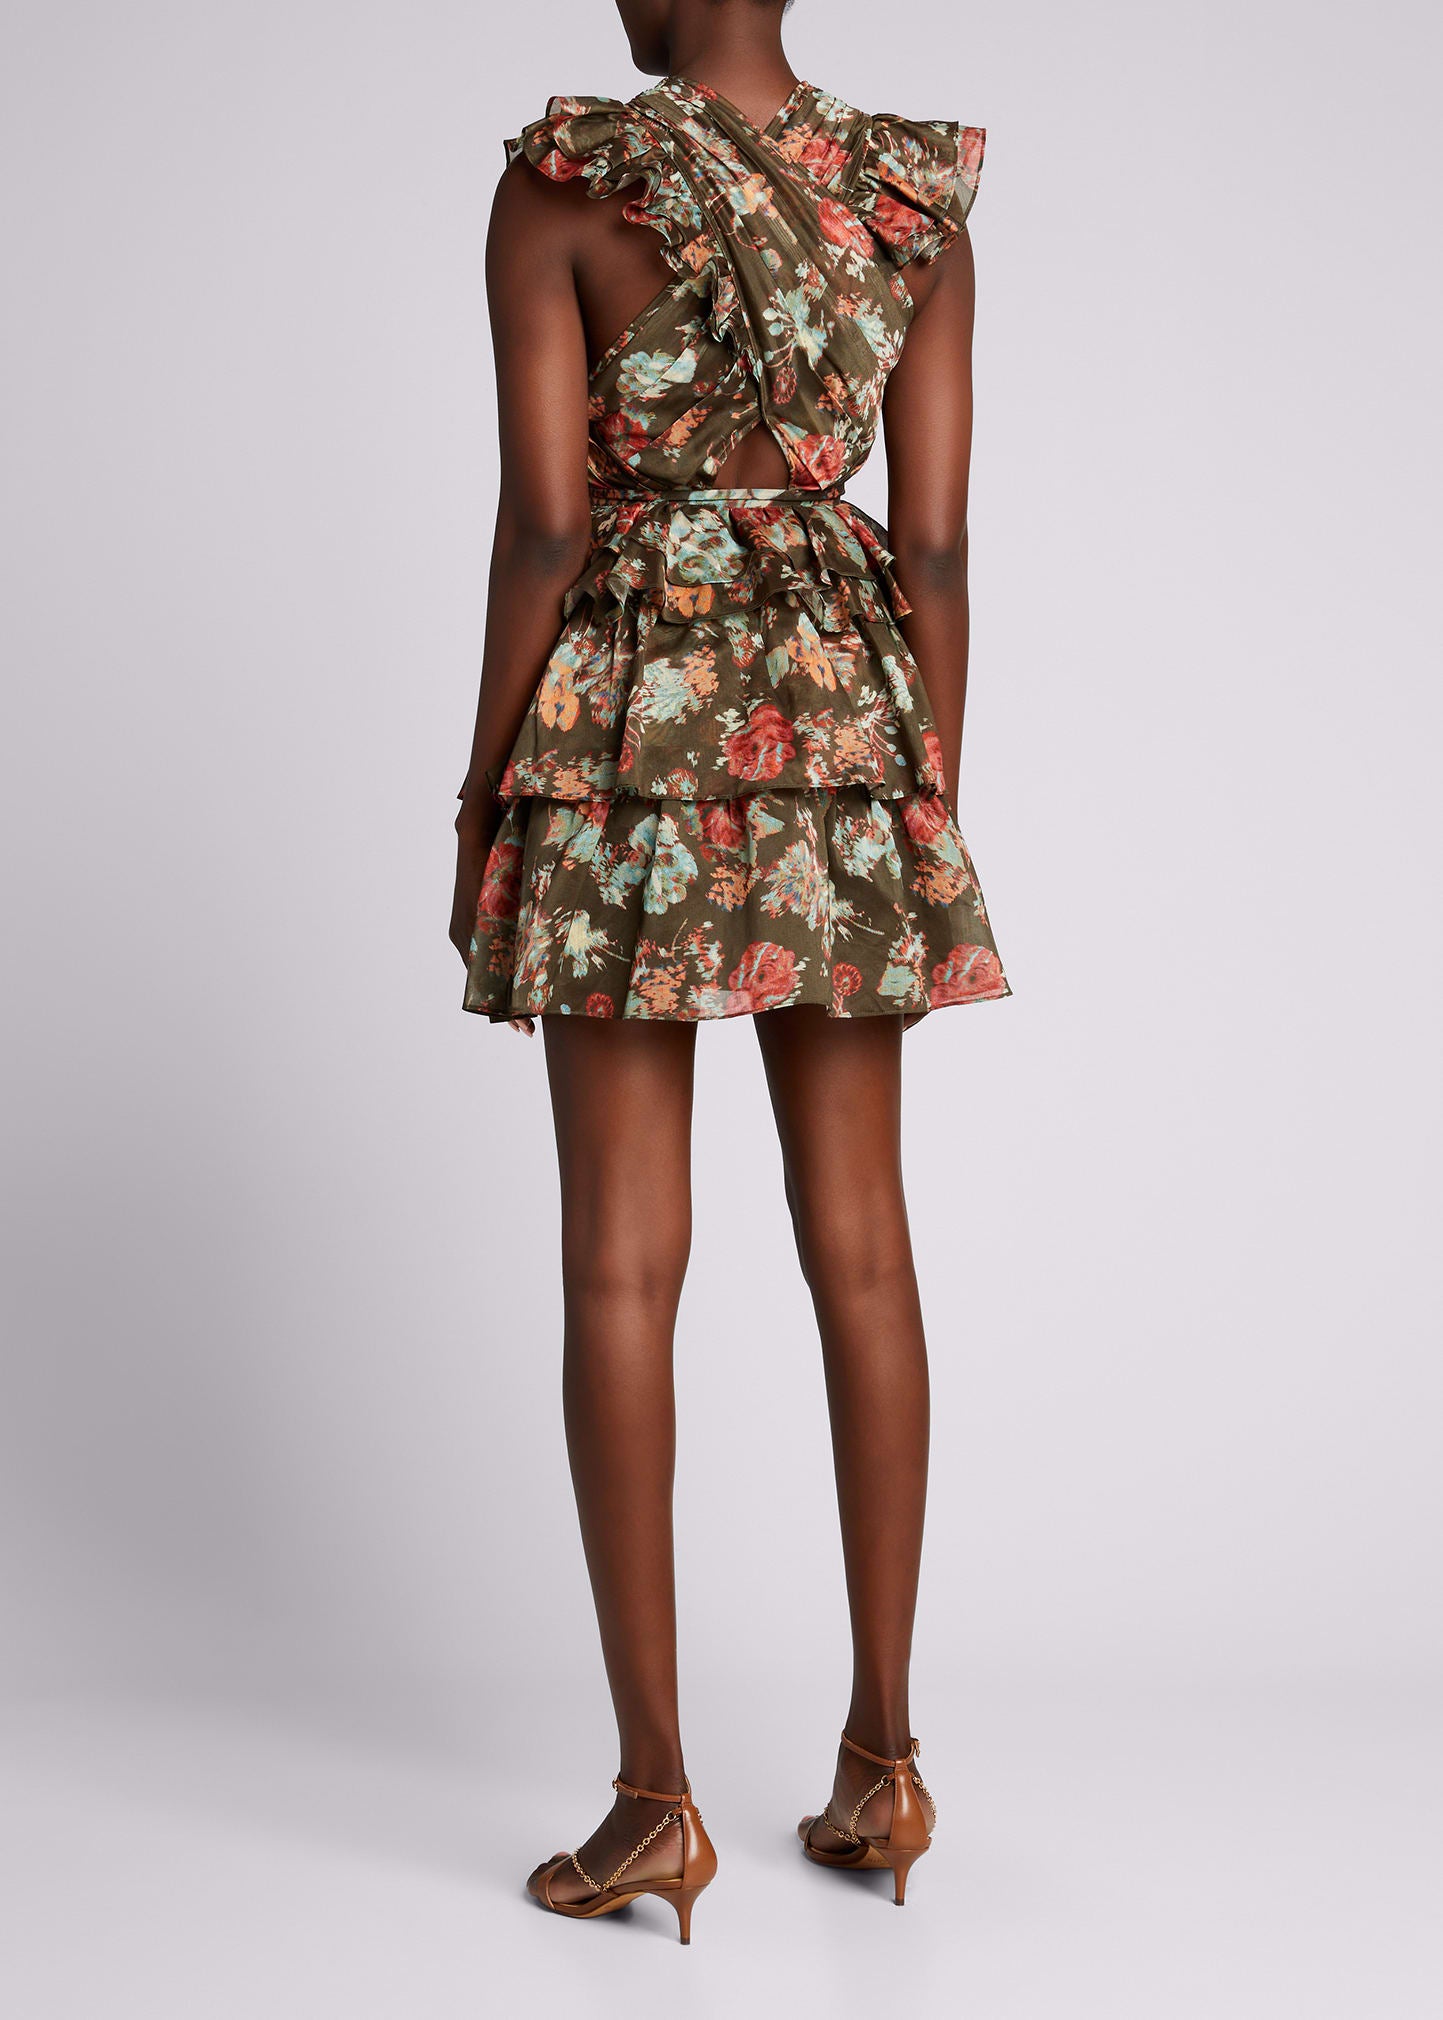 Featured in look 17 from our Spring 2021 runway presentation. The Sarafina Dress is crafted from our lightweight yet structured cotton silk organza fabrication in an unexpected dark olive and deep rose bouquet floral print. This sexy mini dress silhouette is adorned in feminine details including a pleated criss-cross neckline, layered ruffled skirt, and flutter sleeves. Side zipper closure. Composition: 79% Cotton, 21% Silk.